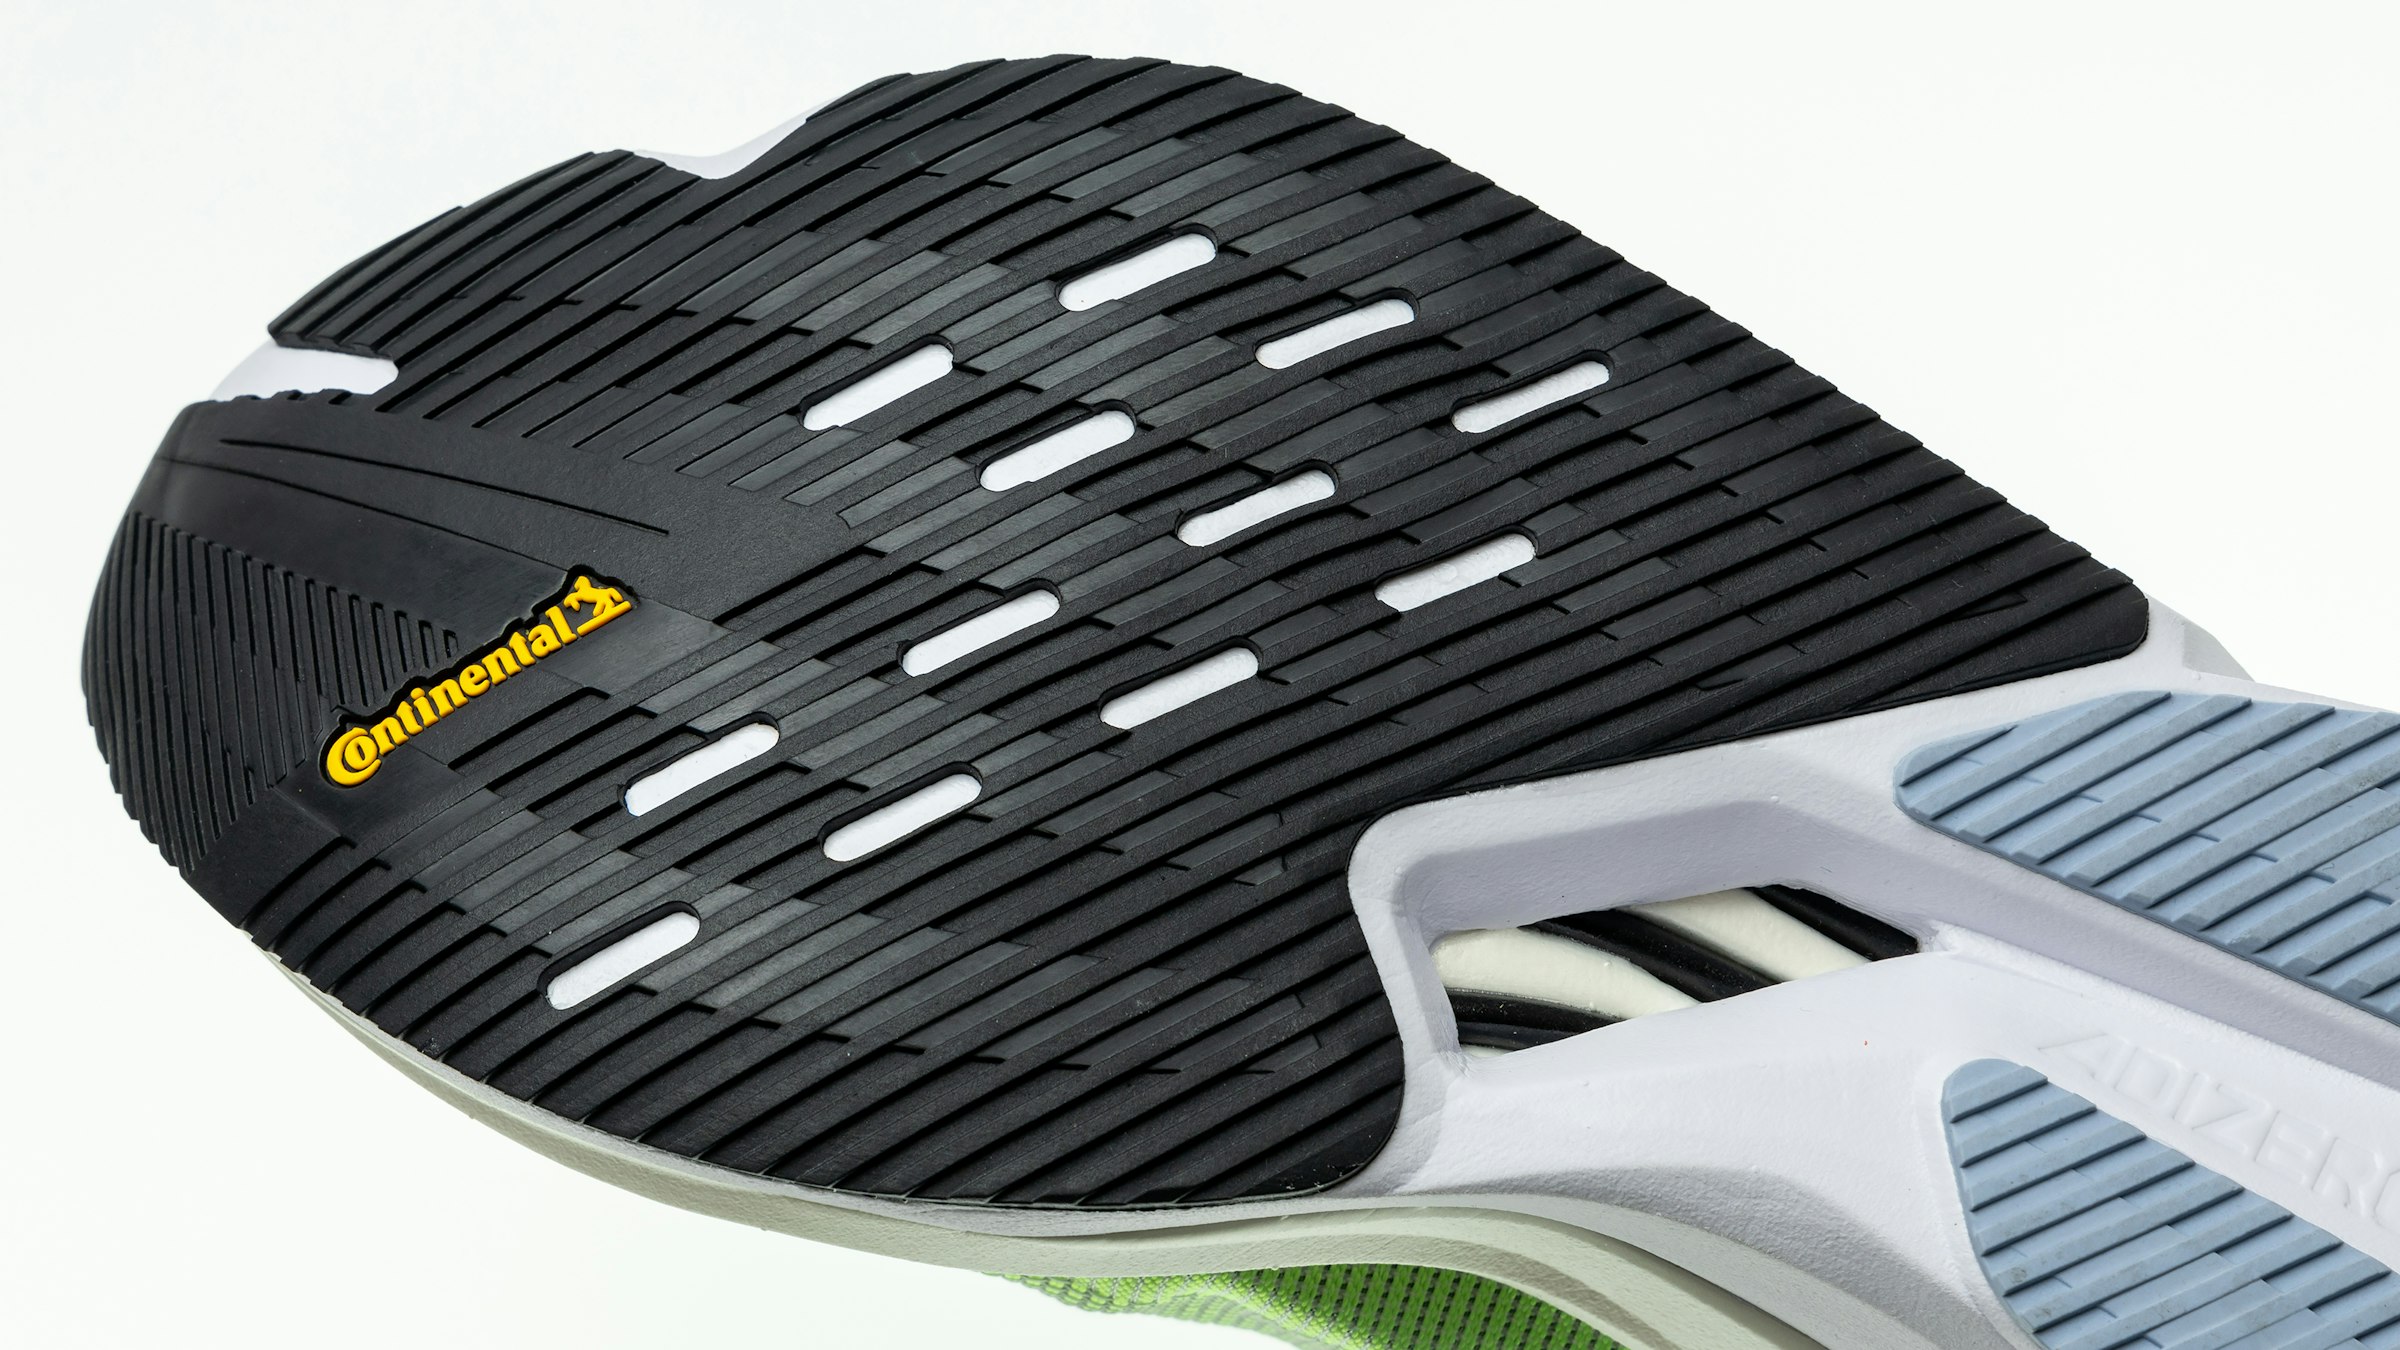 The forefoot to the midfoot of the outsole uses Continental rubber